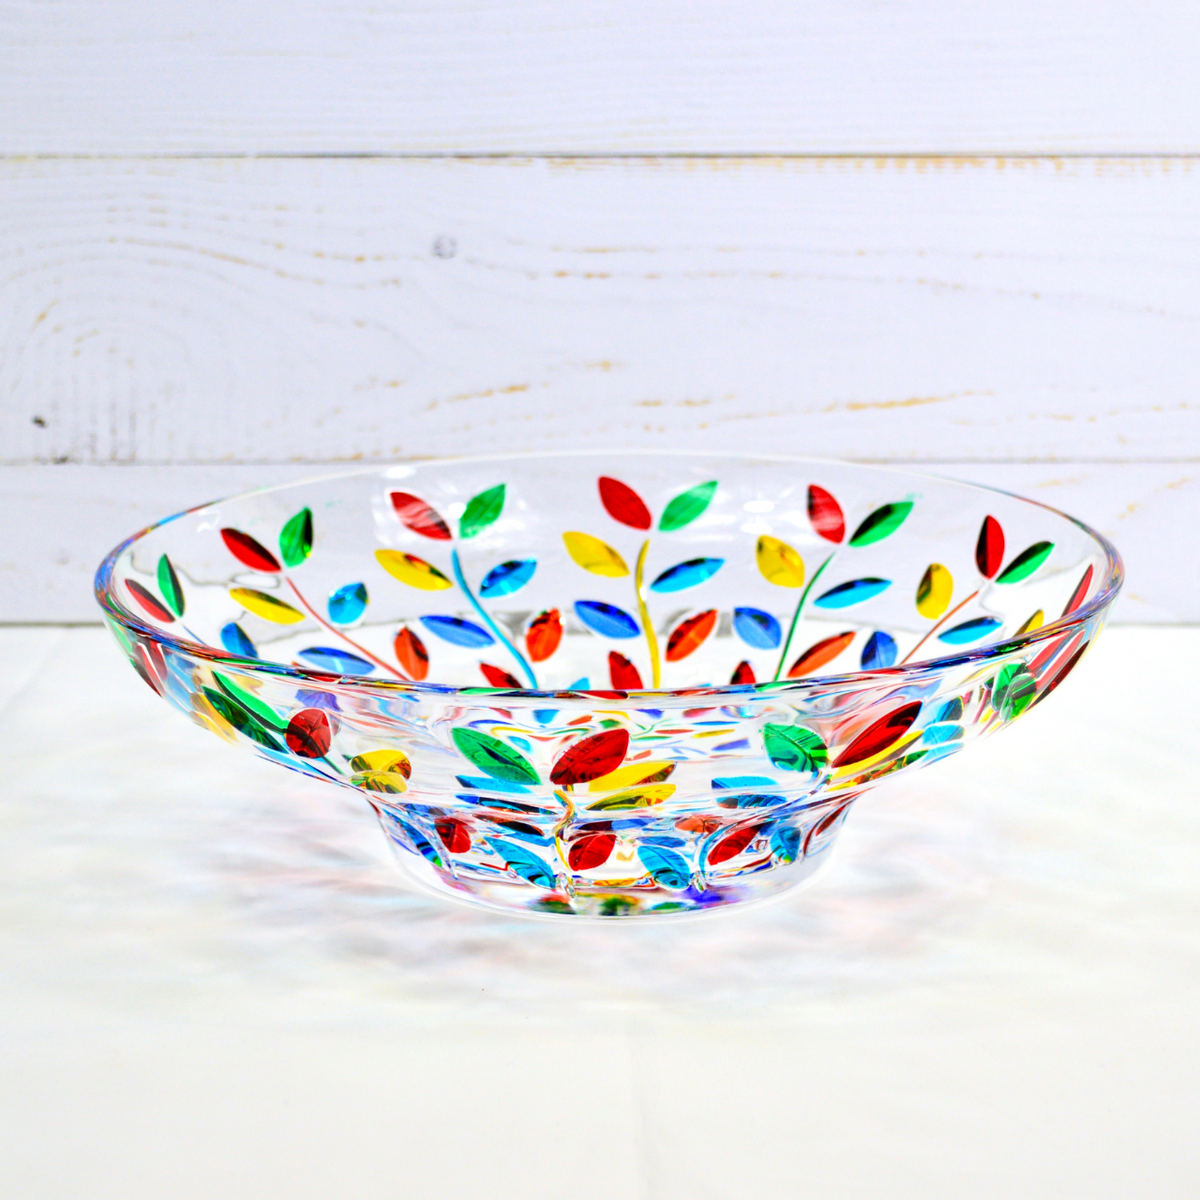 Flowervine Decorative Glass Centerpiece Bowl, Hand Painted, Made In Italy - My Italian Decor